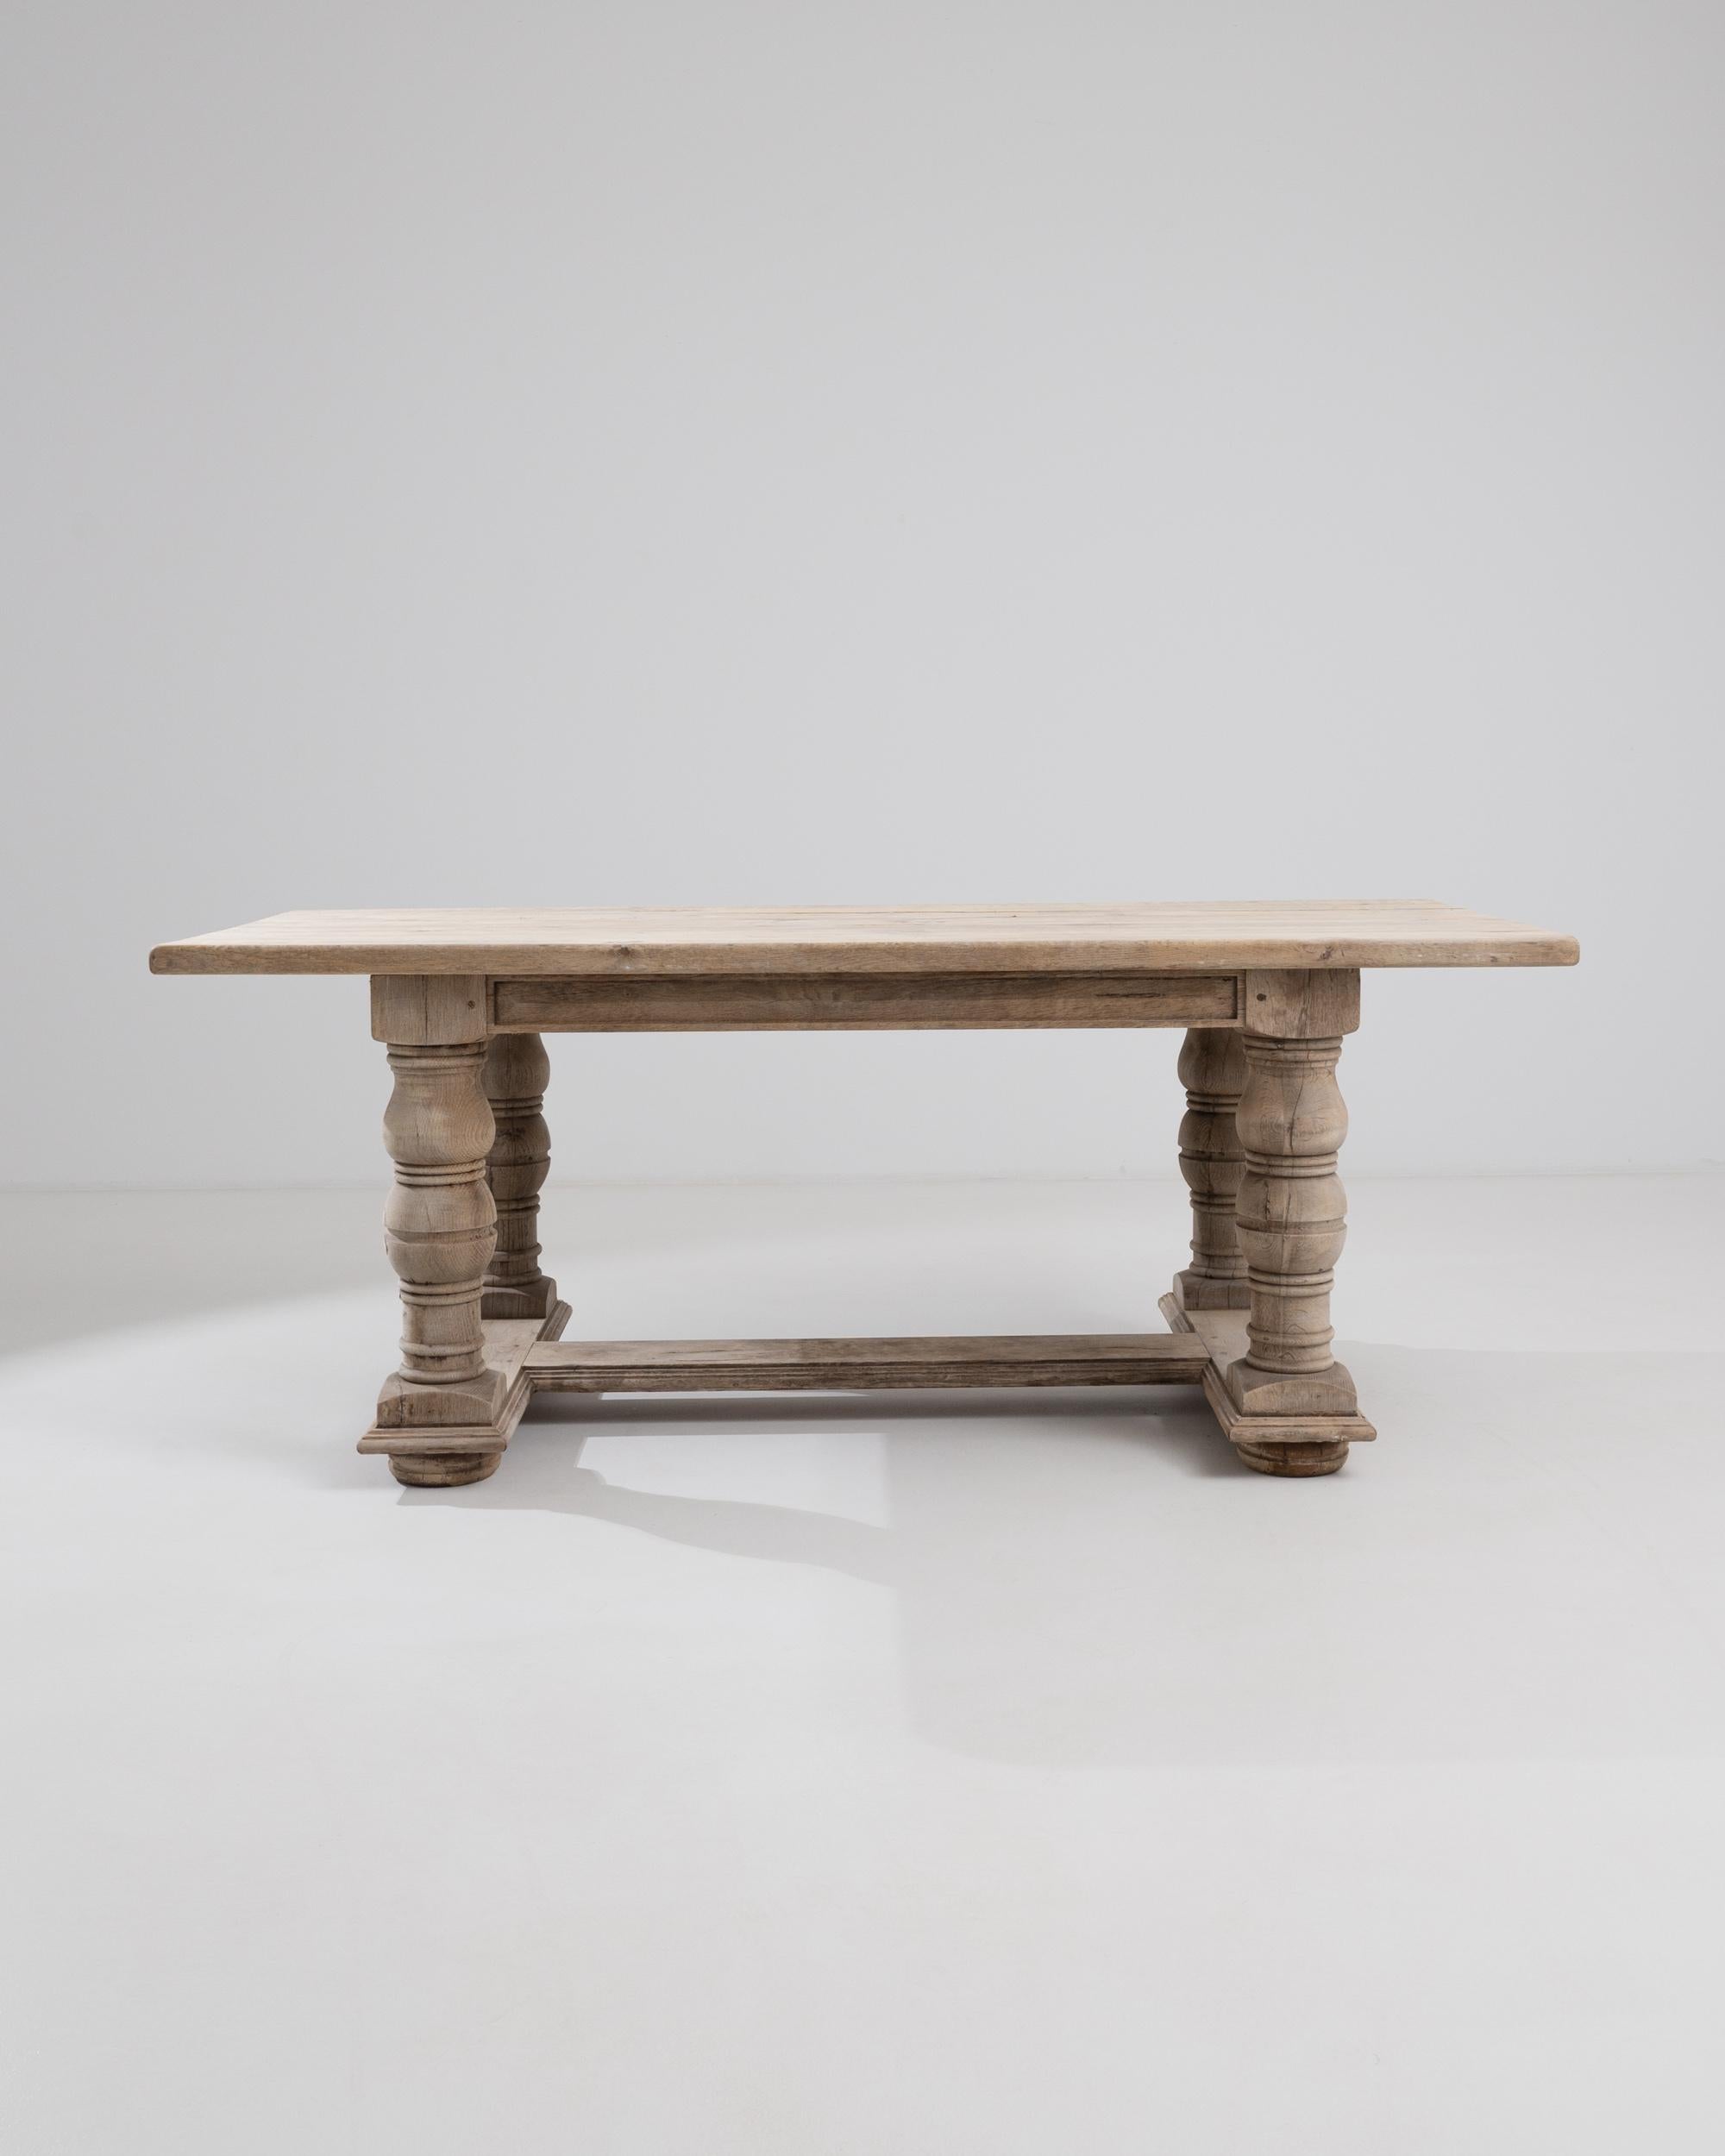 A 20th century belgian bleached oak dining table. This large trestle table is marked by regal craftsmanship: colossal legs are carved with precision, careful profiles completing the edges of each piece. Refreshed with a natural finish in our